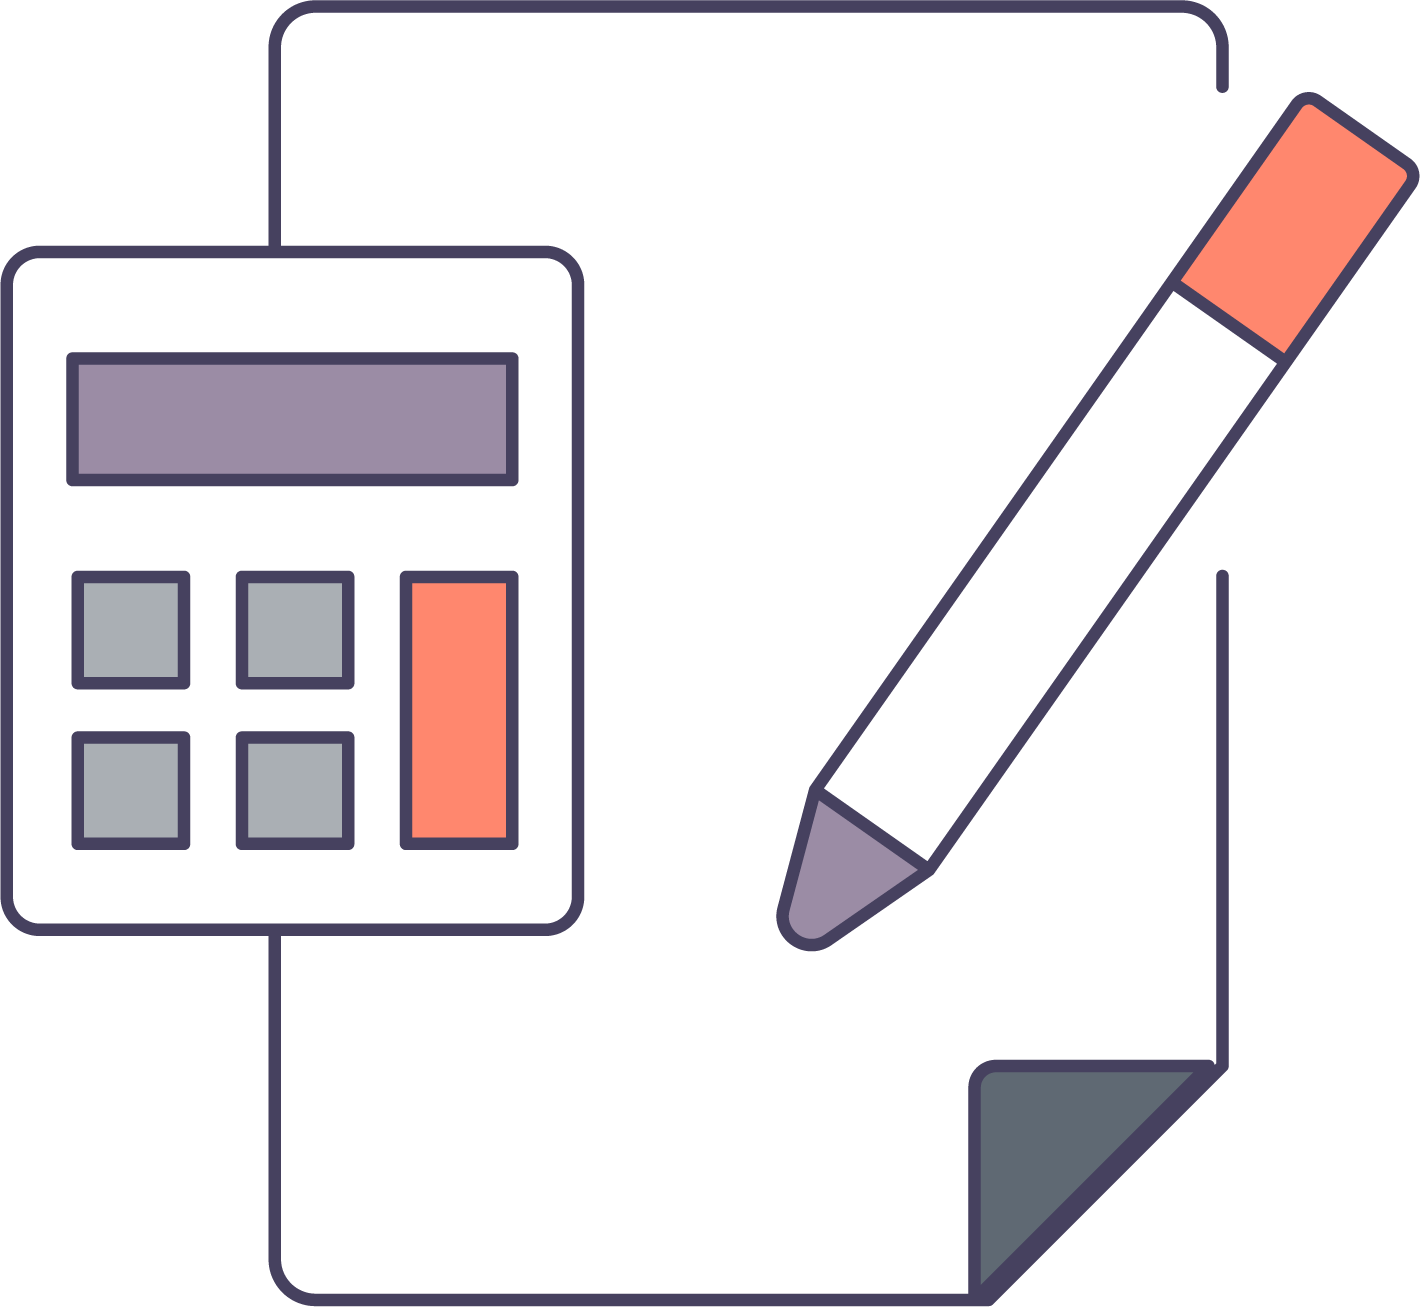 Icon of a calculator, pad and pen.